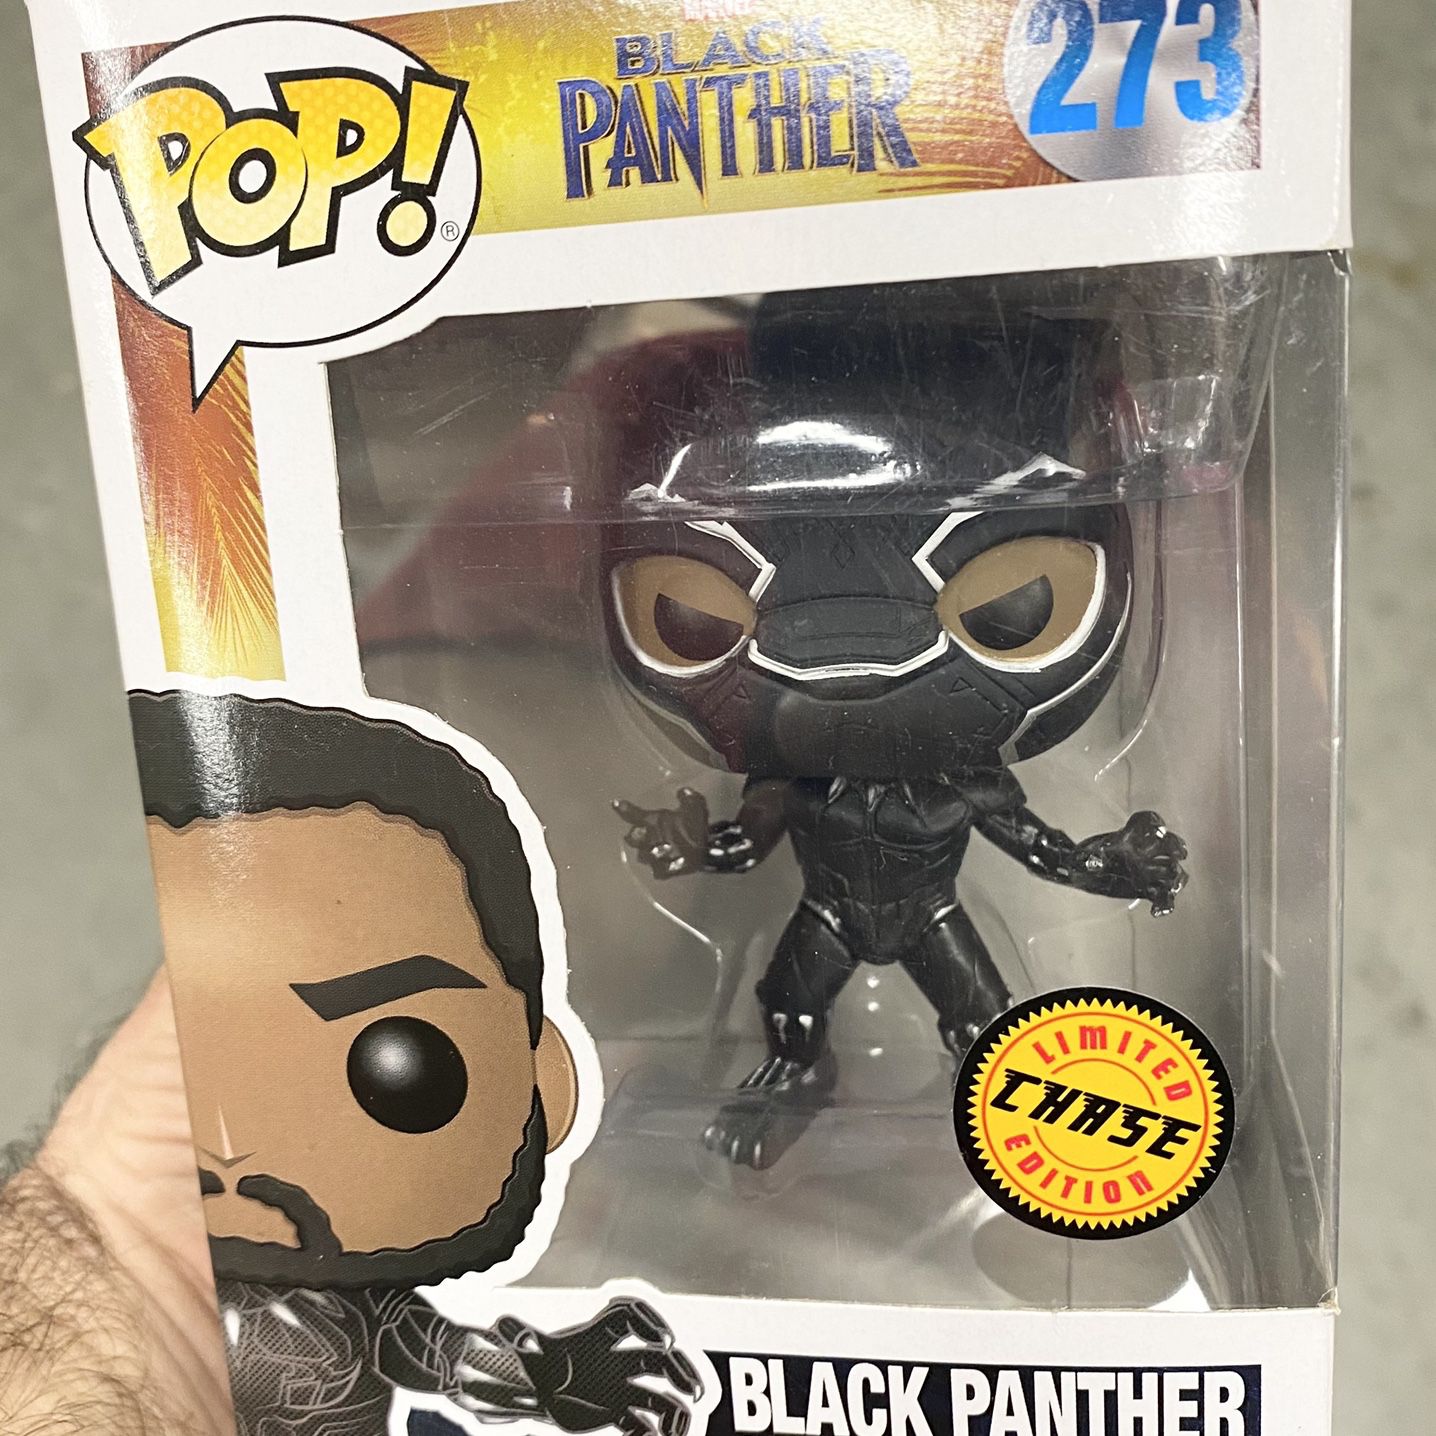 Funko Black Panther Funko Pop! Vinyl Figure #273 Marvel Comics Rare for Sale in Savage, MD OfferUp